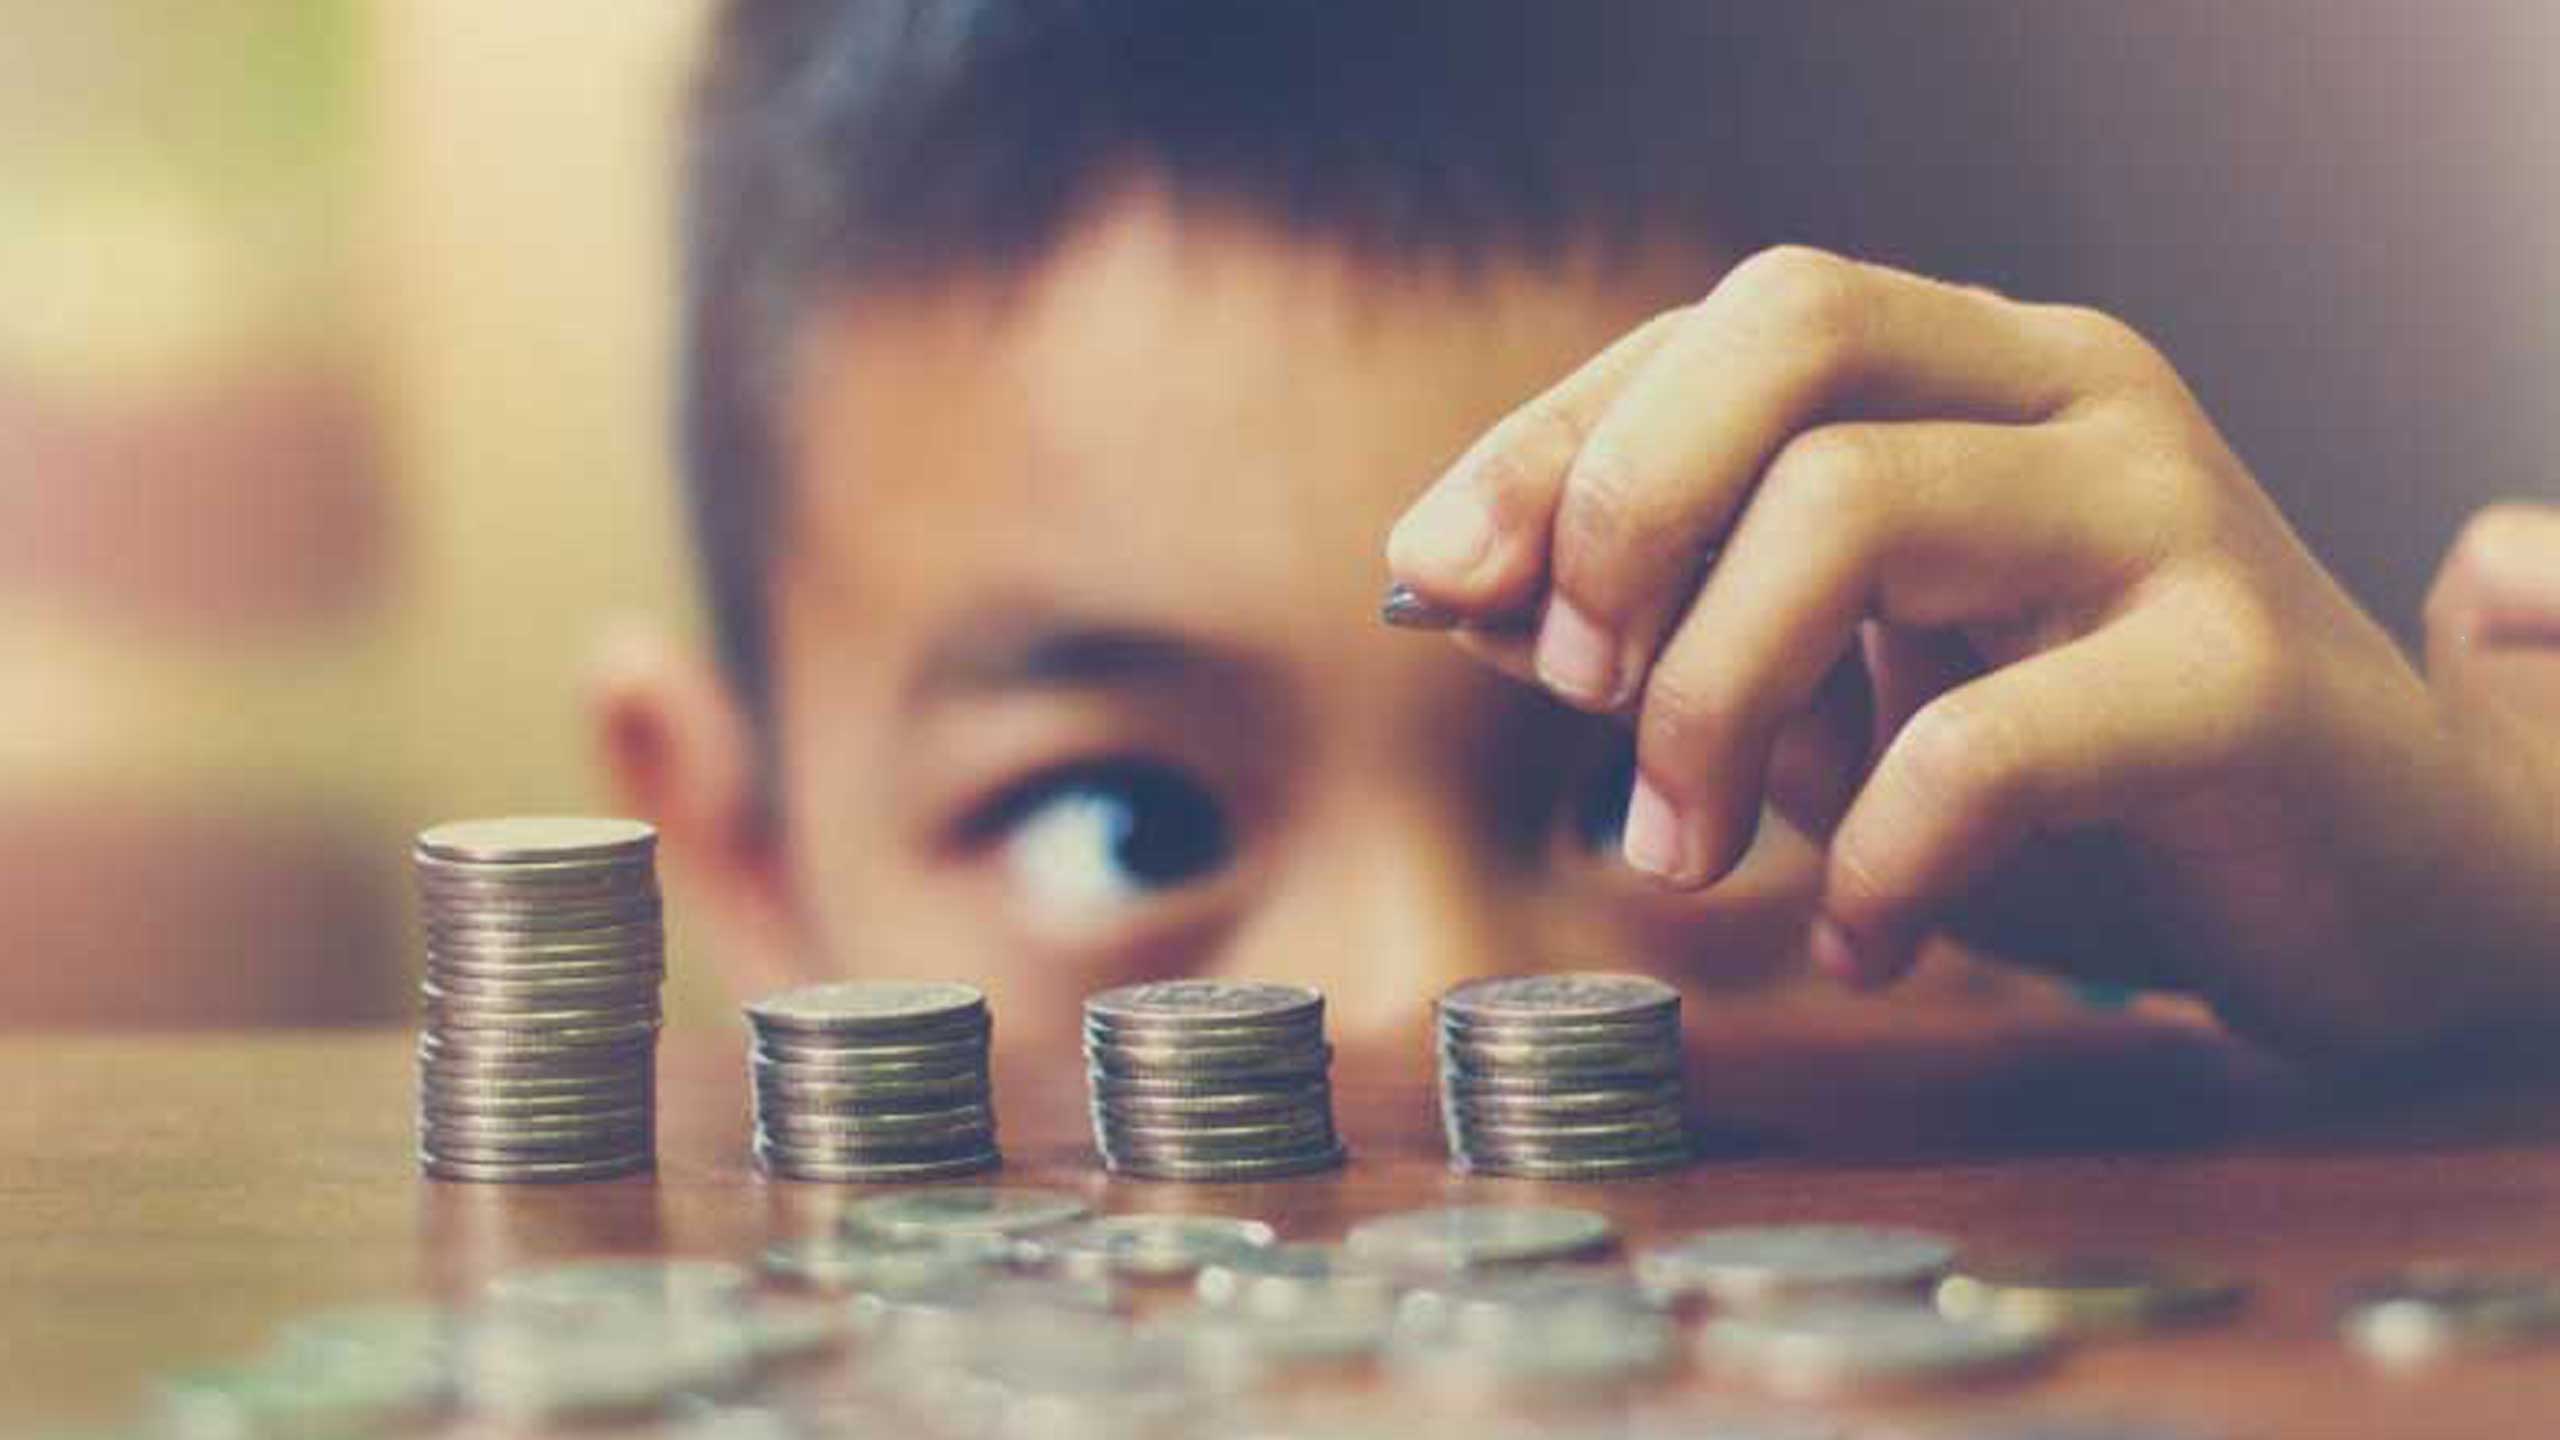 Boy stacking coins on table; image used for HSBC Singapore 4 type of investment tools you should know about article.